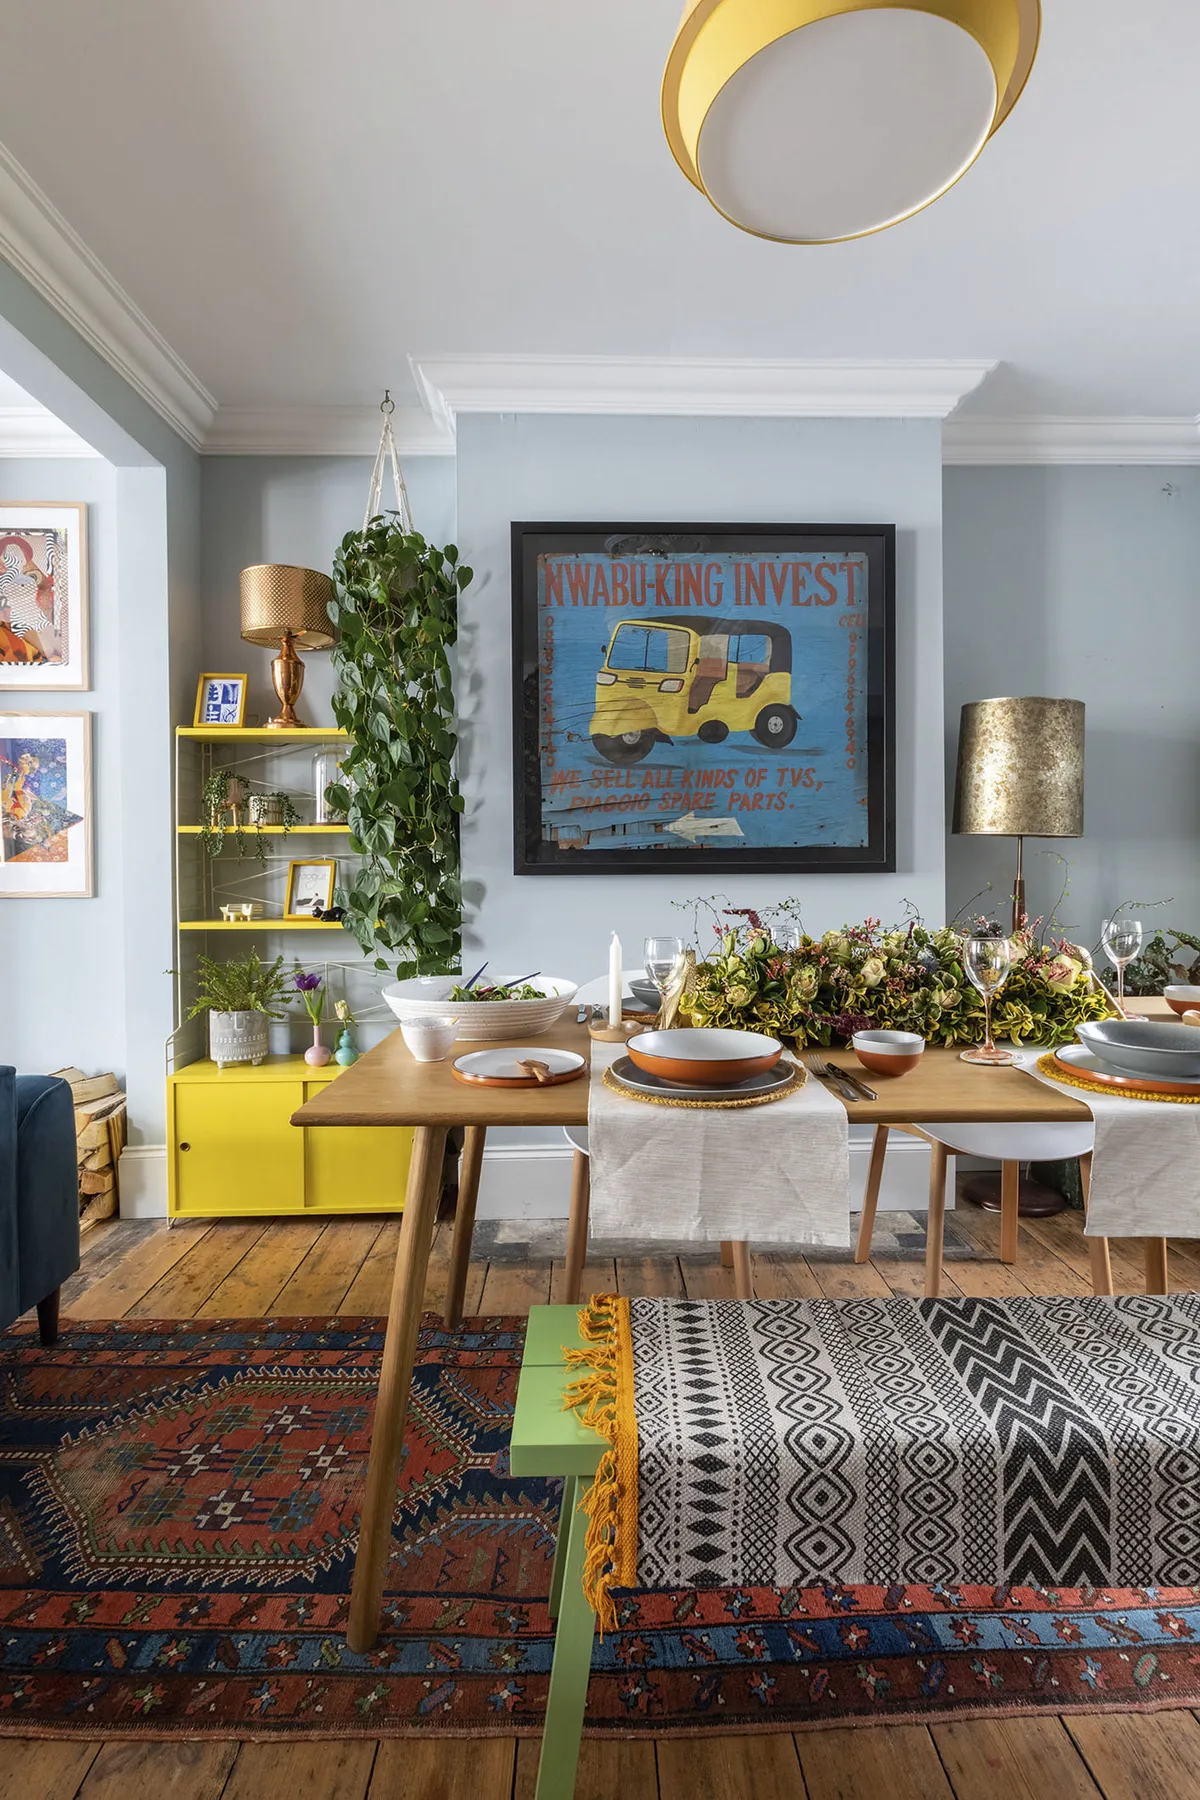 In the dining room, an African street sign Johan brought back from Malawi sets the tone for more colour, with a rainbow of crockery from Habitat. Bench-style seating makes for a cosy and sociable atmosphere